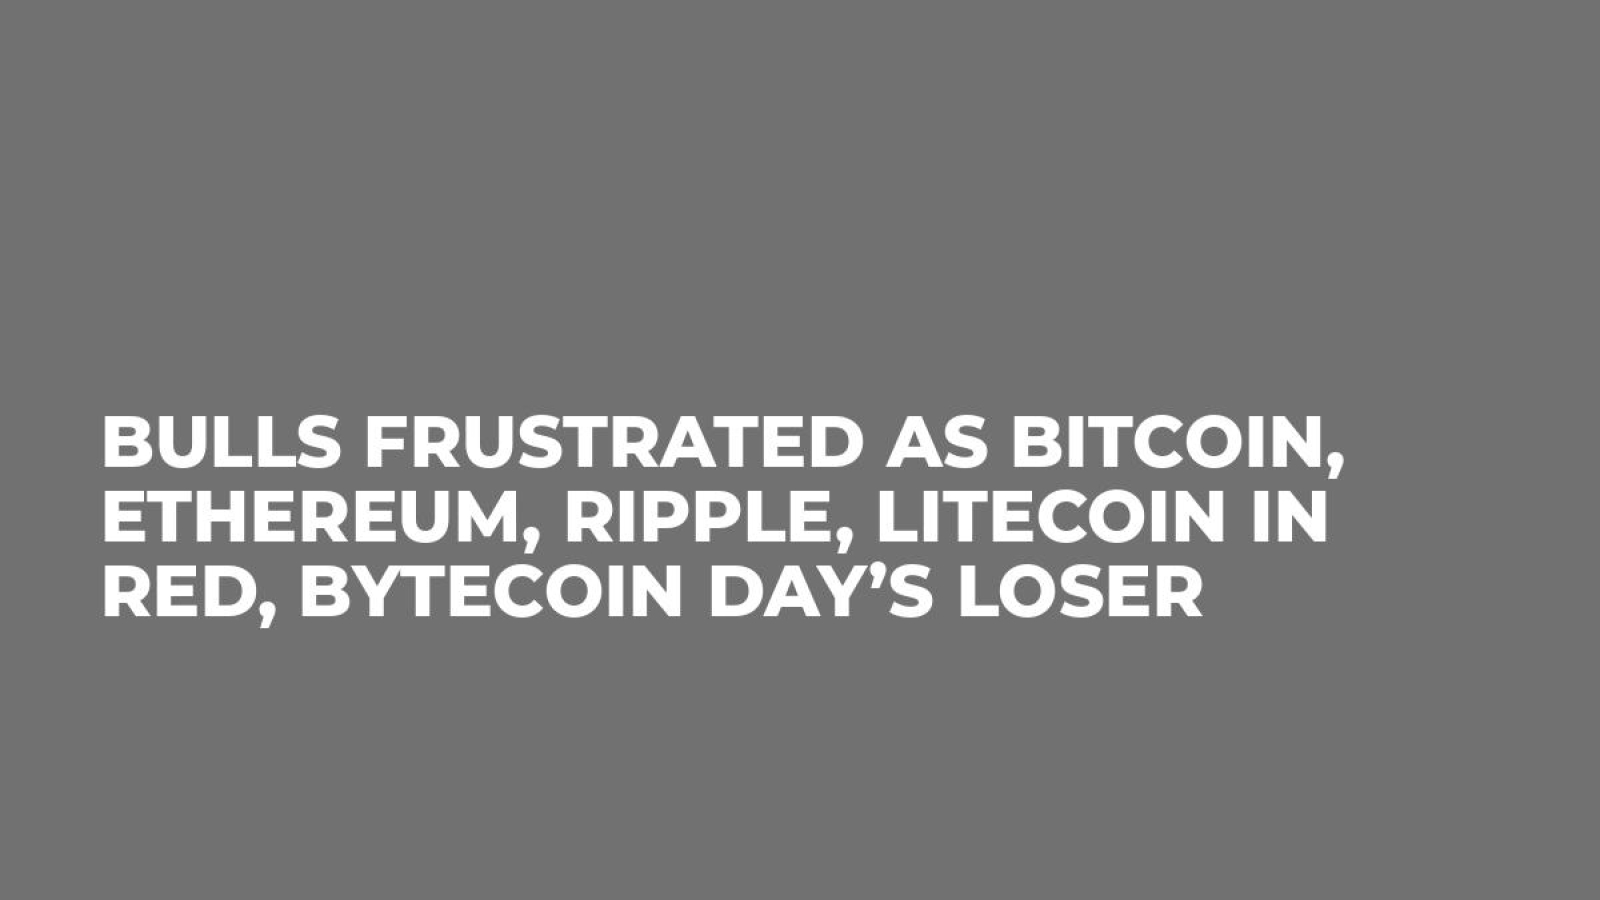 Bulls Frustrated as Bitcoin, Ethereum, Ripple, Litecoin in Red, Bytecoin Day’s Loser